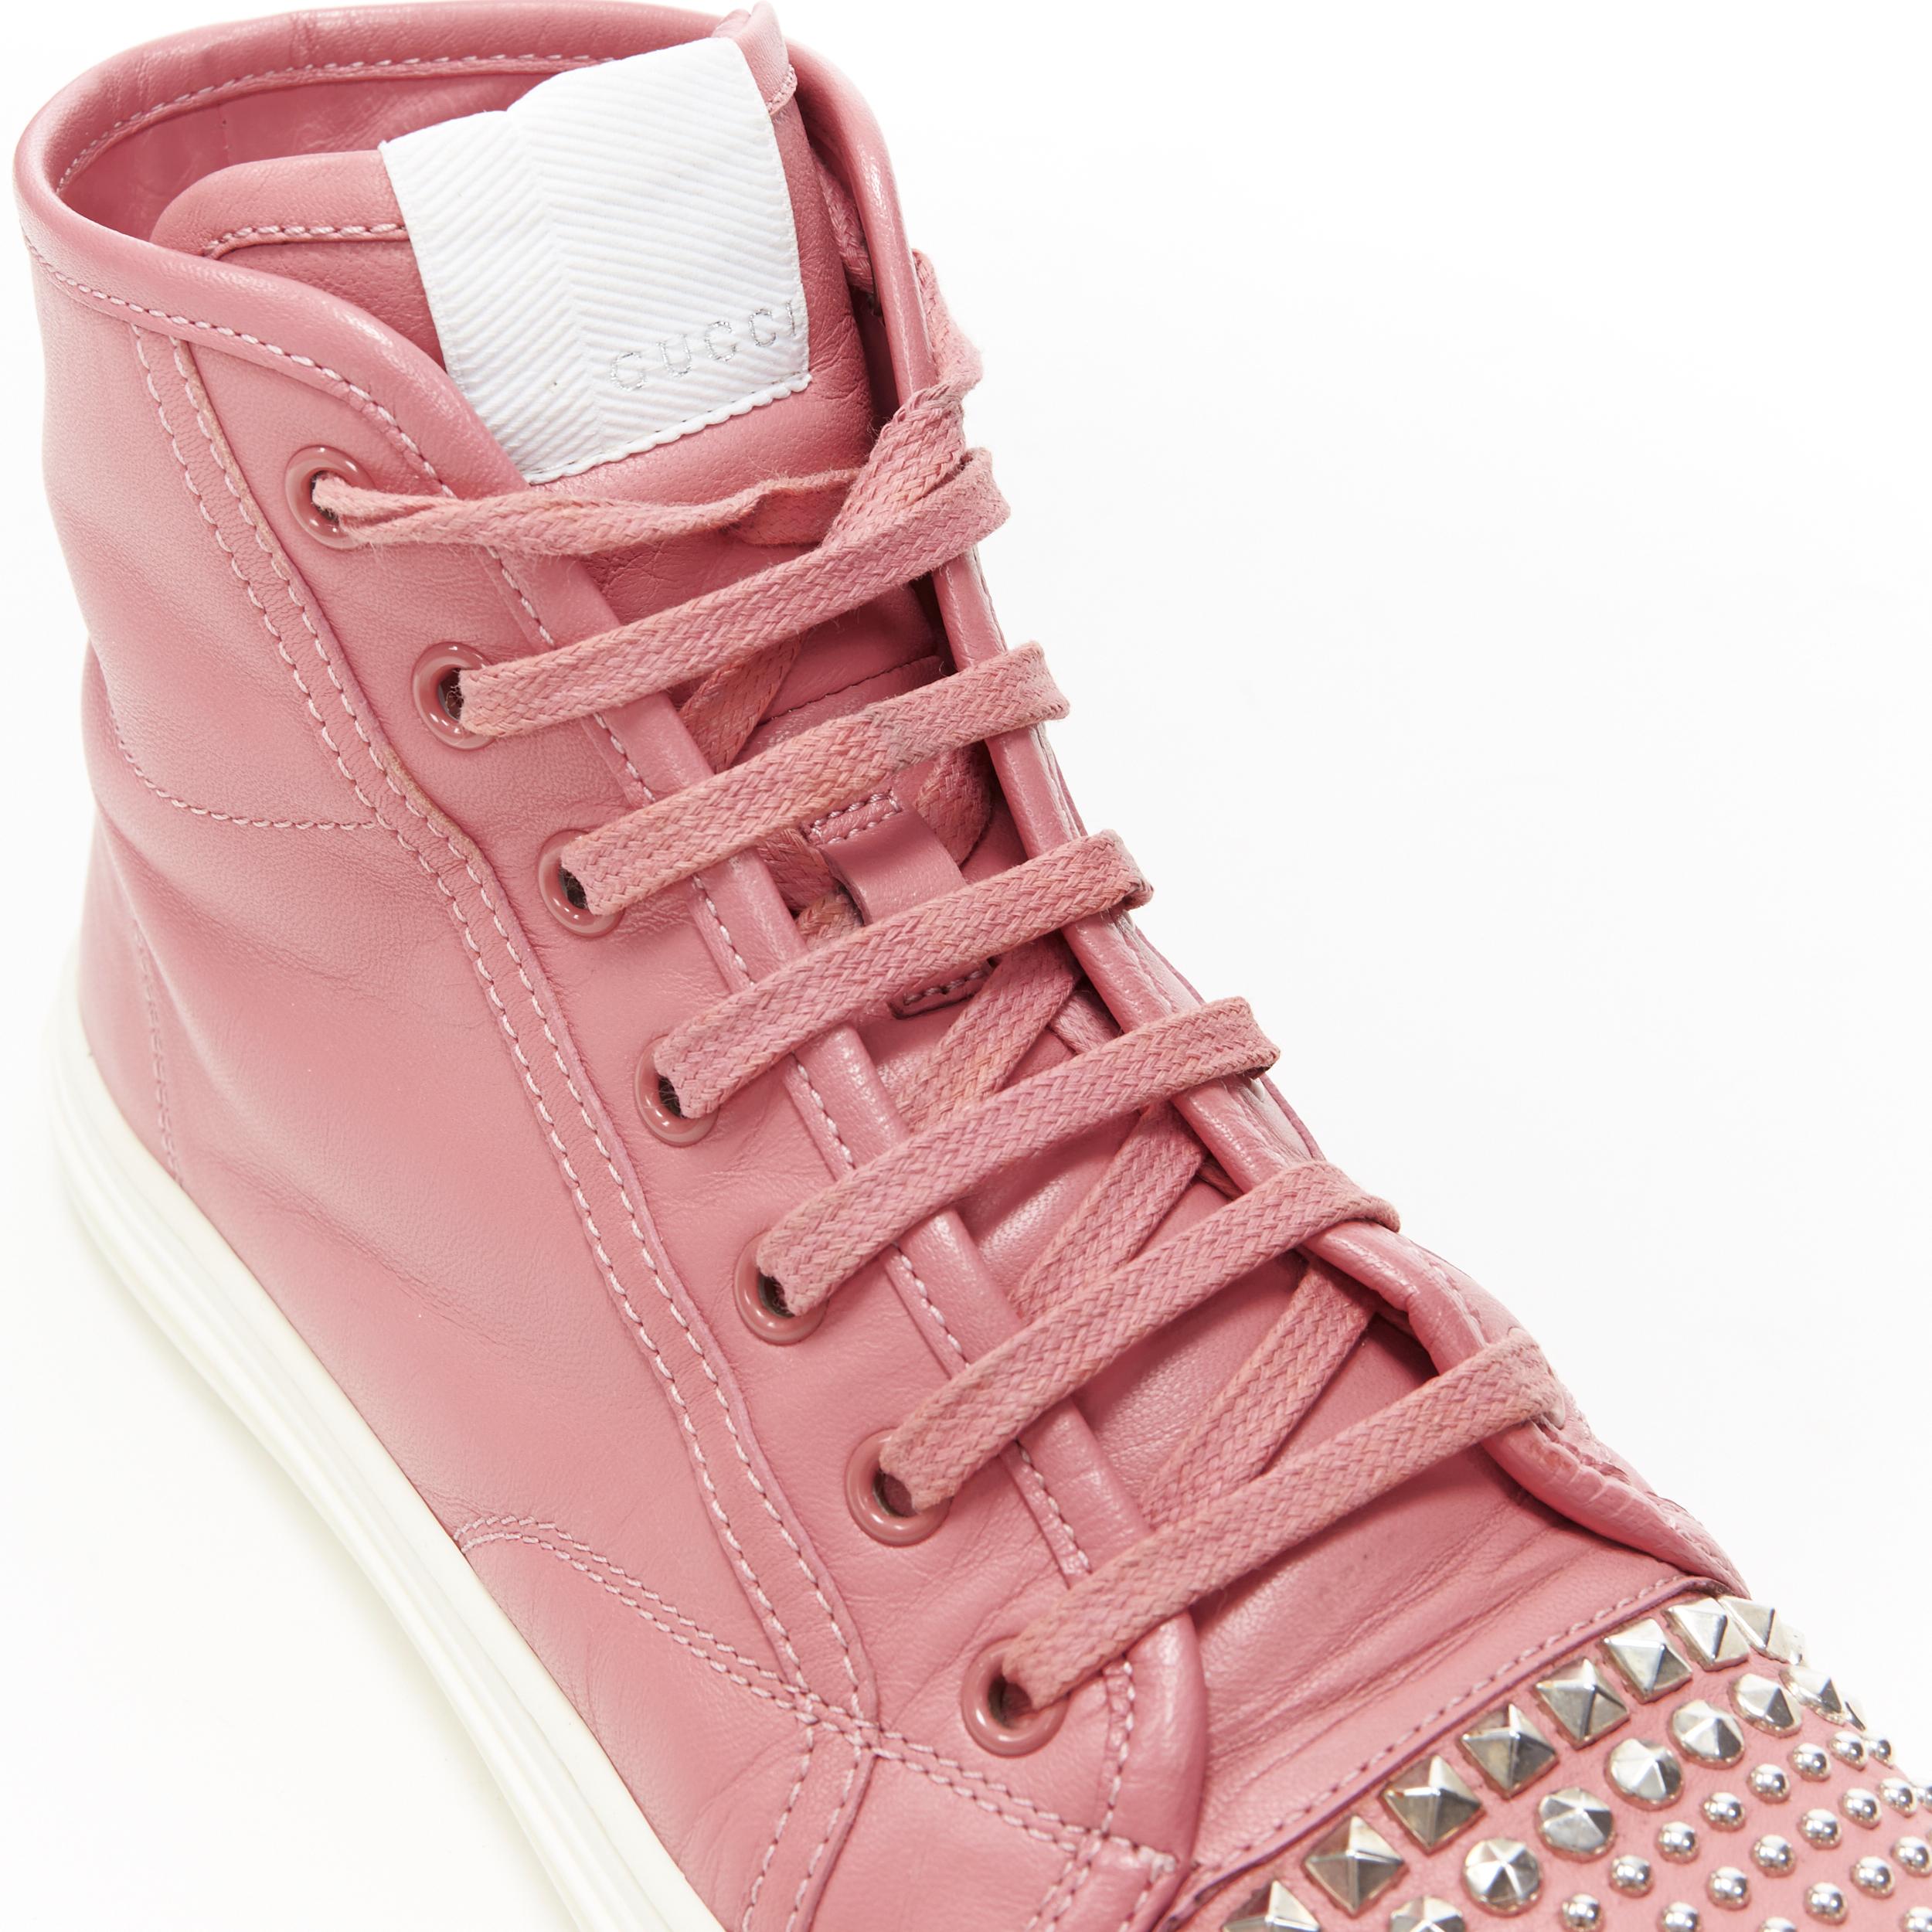 Women's GUCCI pink leather studded toe cap high top casual sneakesr EU36.5